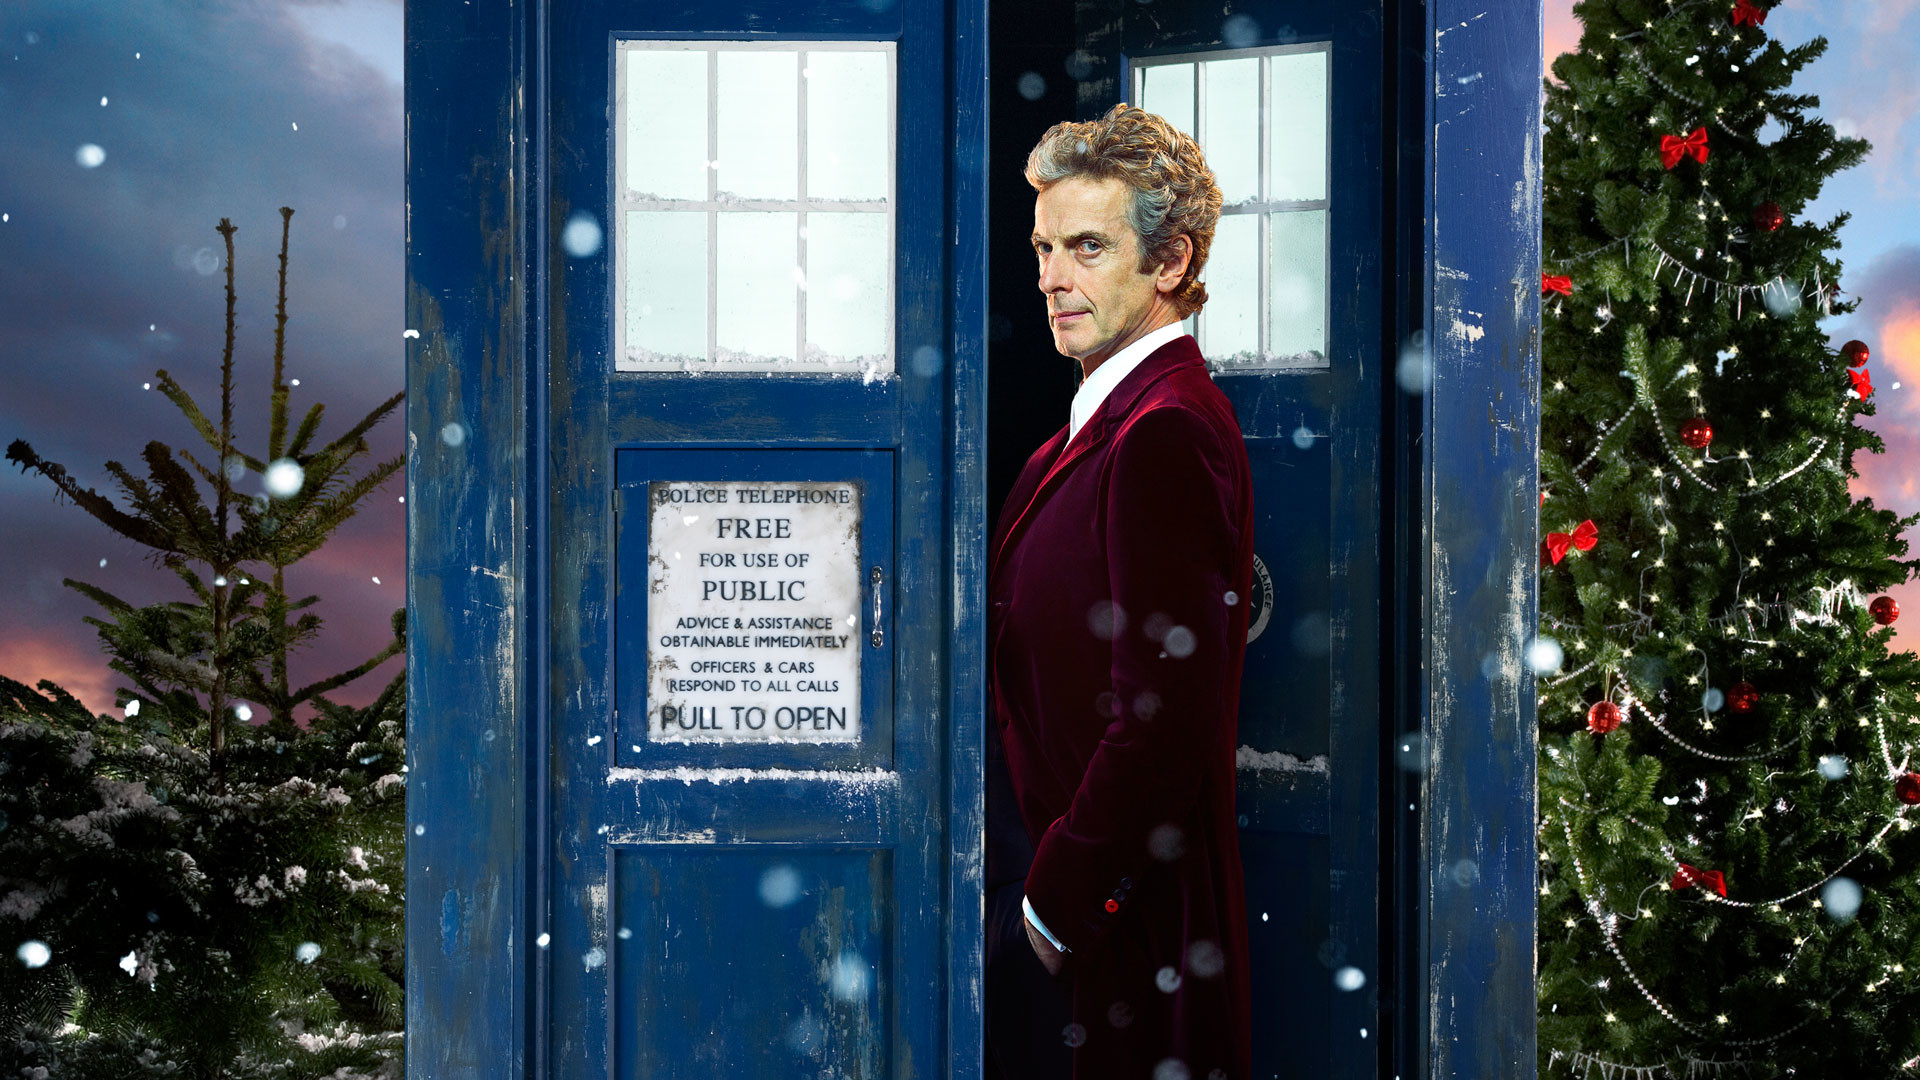 Arts/CraftsA Doctor Who Christmas Wallpaper featuring Peter Capaldi as the  Doctor, nice and early for your desktop!